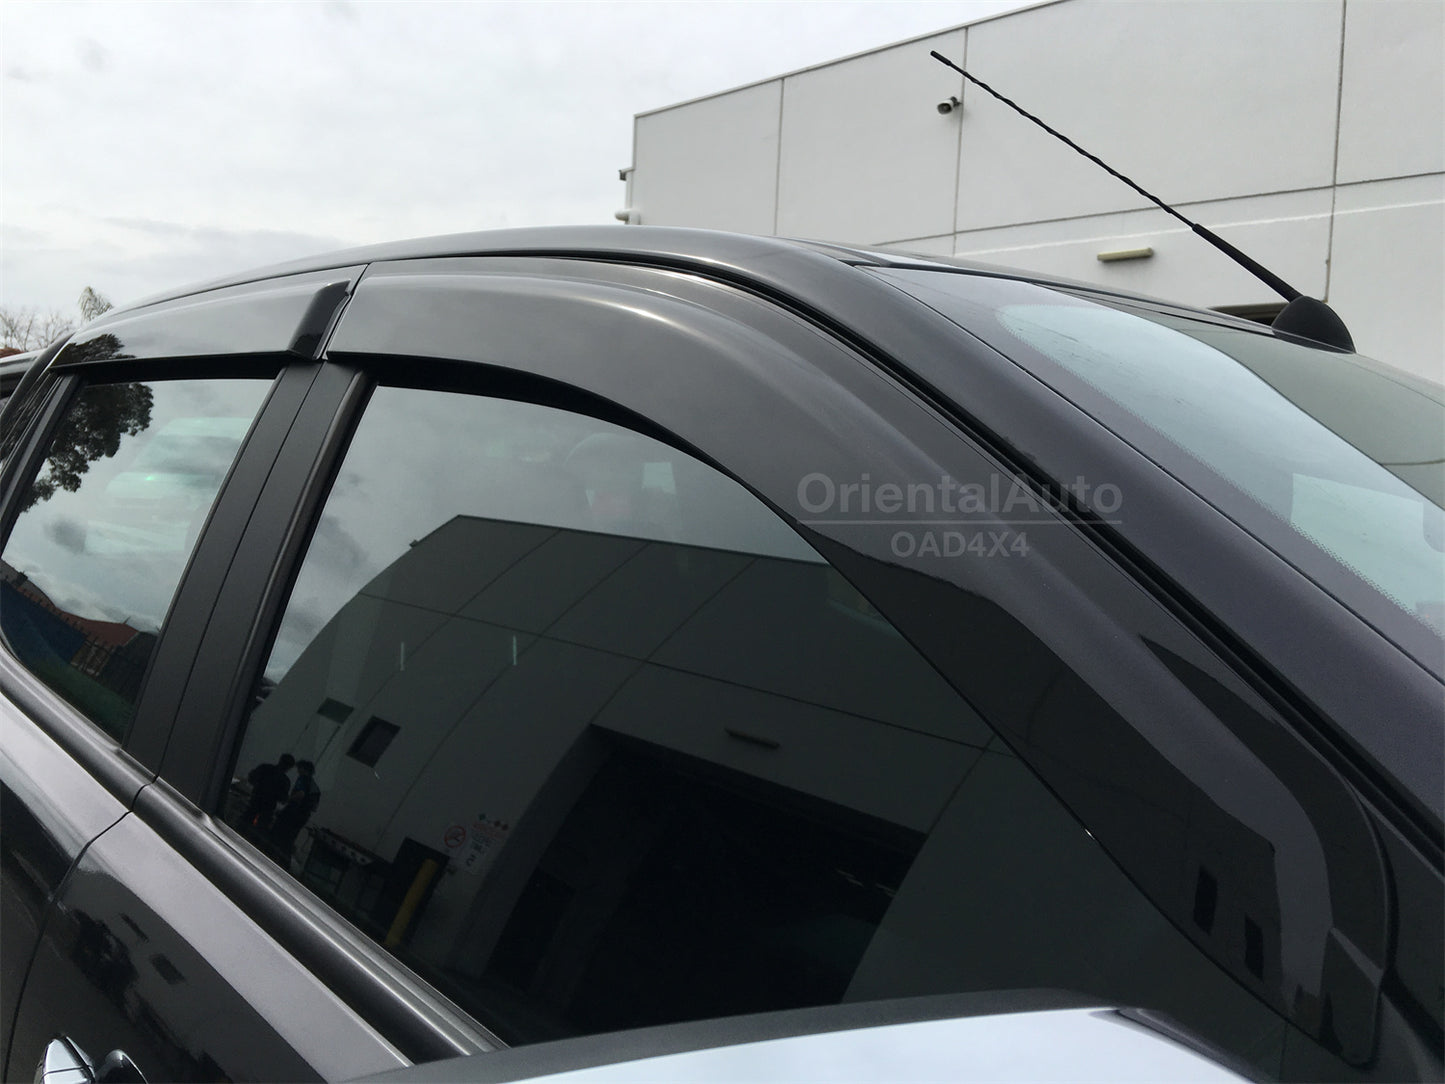 Injection Weather Shields & BLACK Door Sills Protector for Ford Ranger Dual Cab 2011-2022 Window Visors Weathershield Scuff Plates